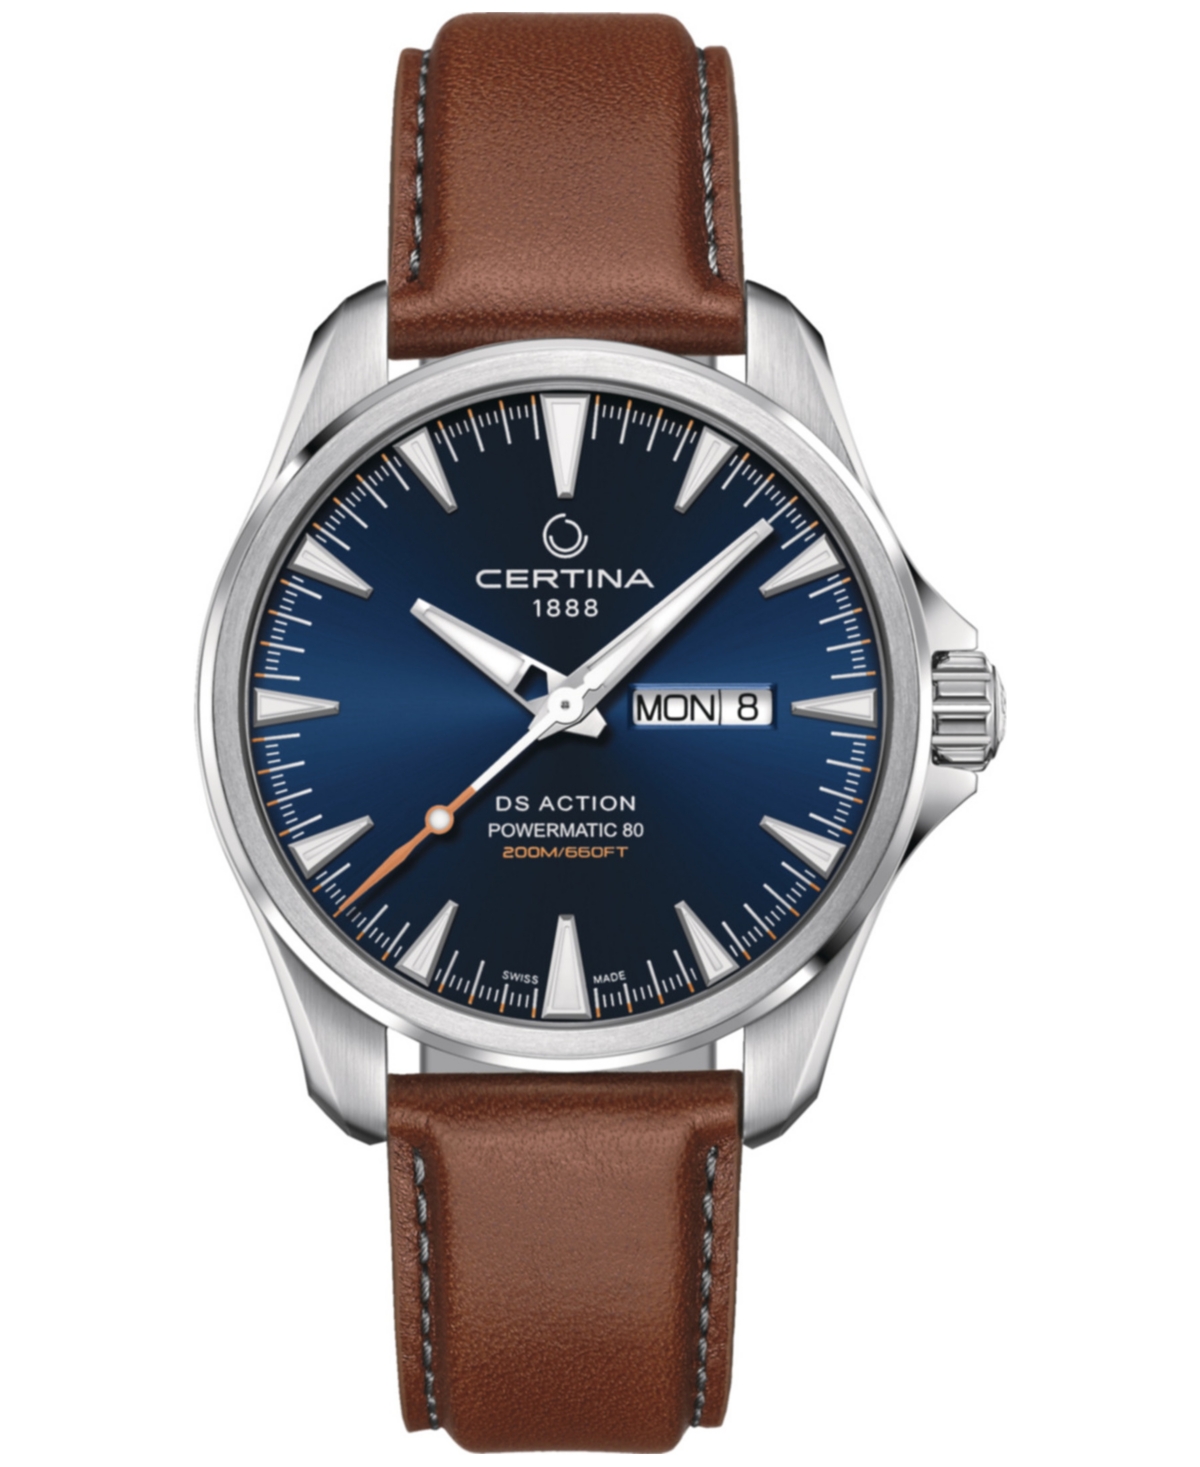 Certina Men's Swiss Automatic Ds Action Brown Leather Strap Watch 41mm In Blue